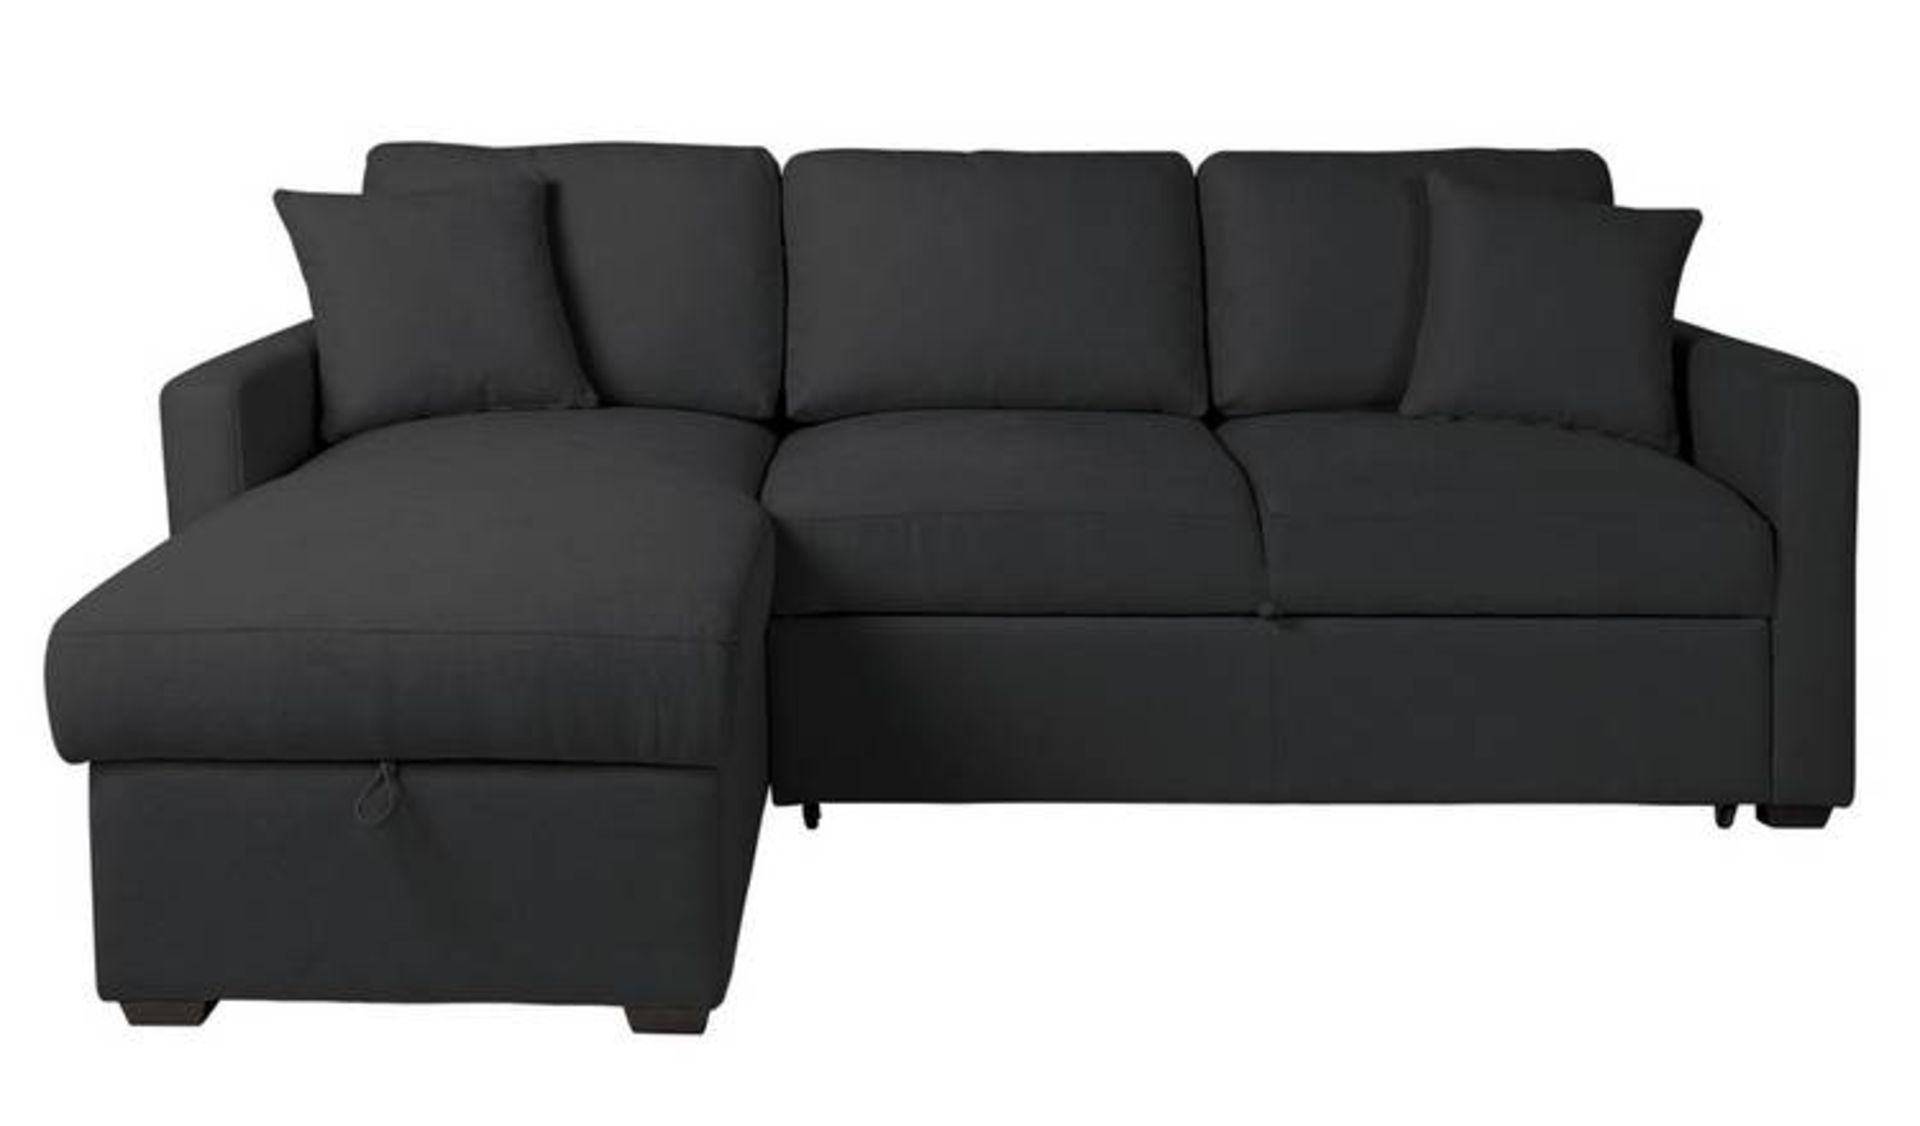 Black Fabric Left Hand Facing Sofa / Sofabed Smart lines, simple styling and handy storage space are